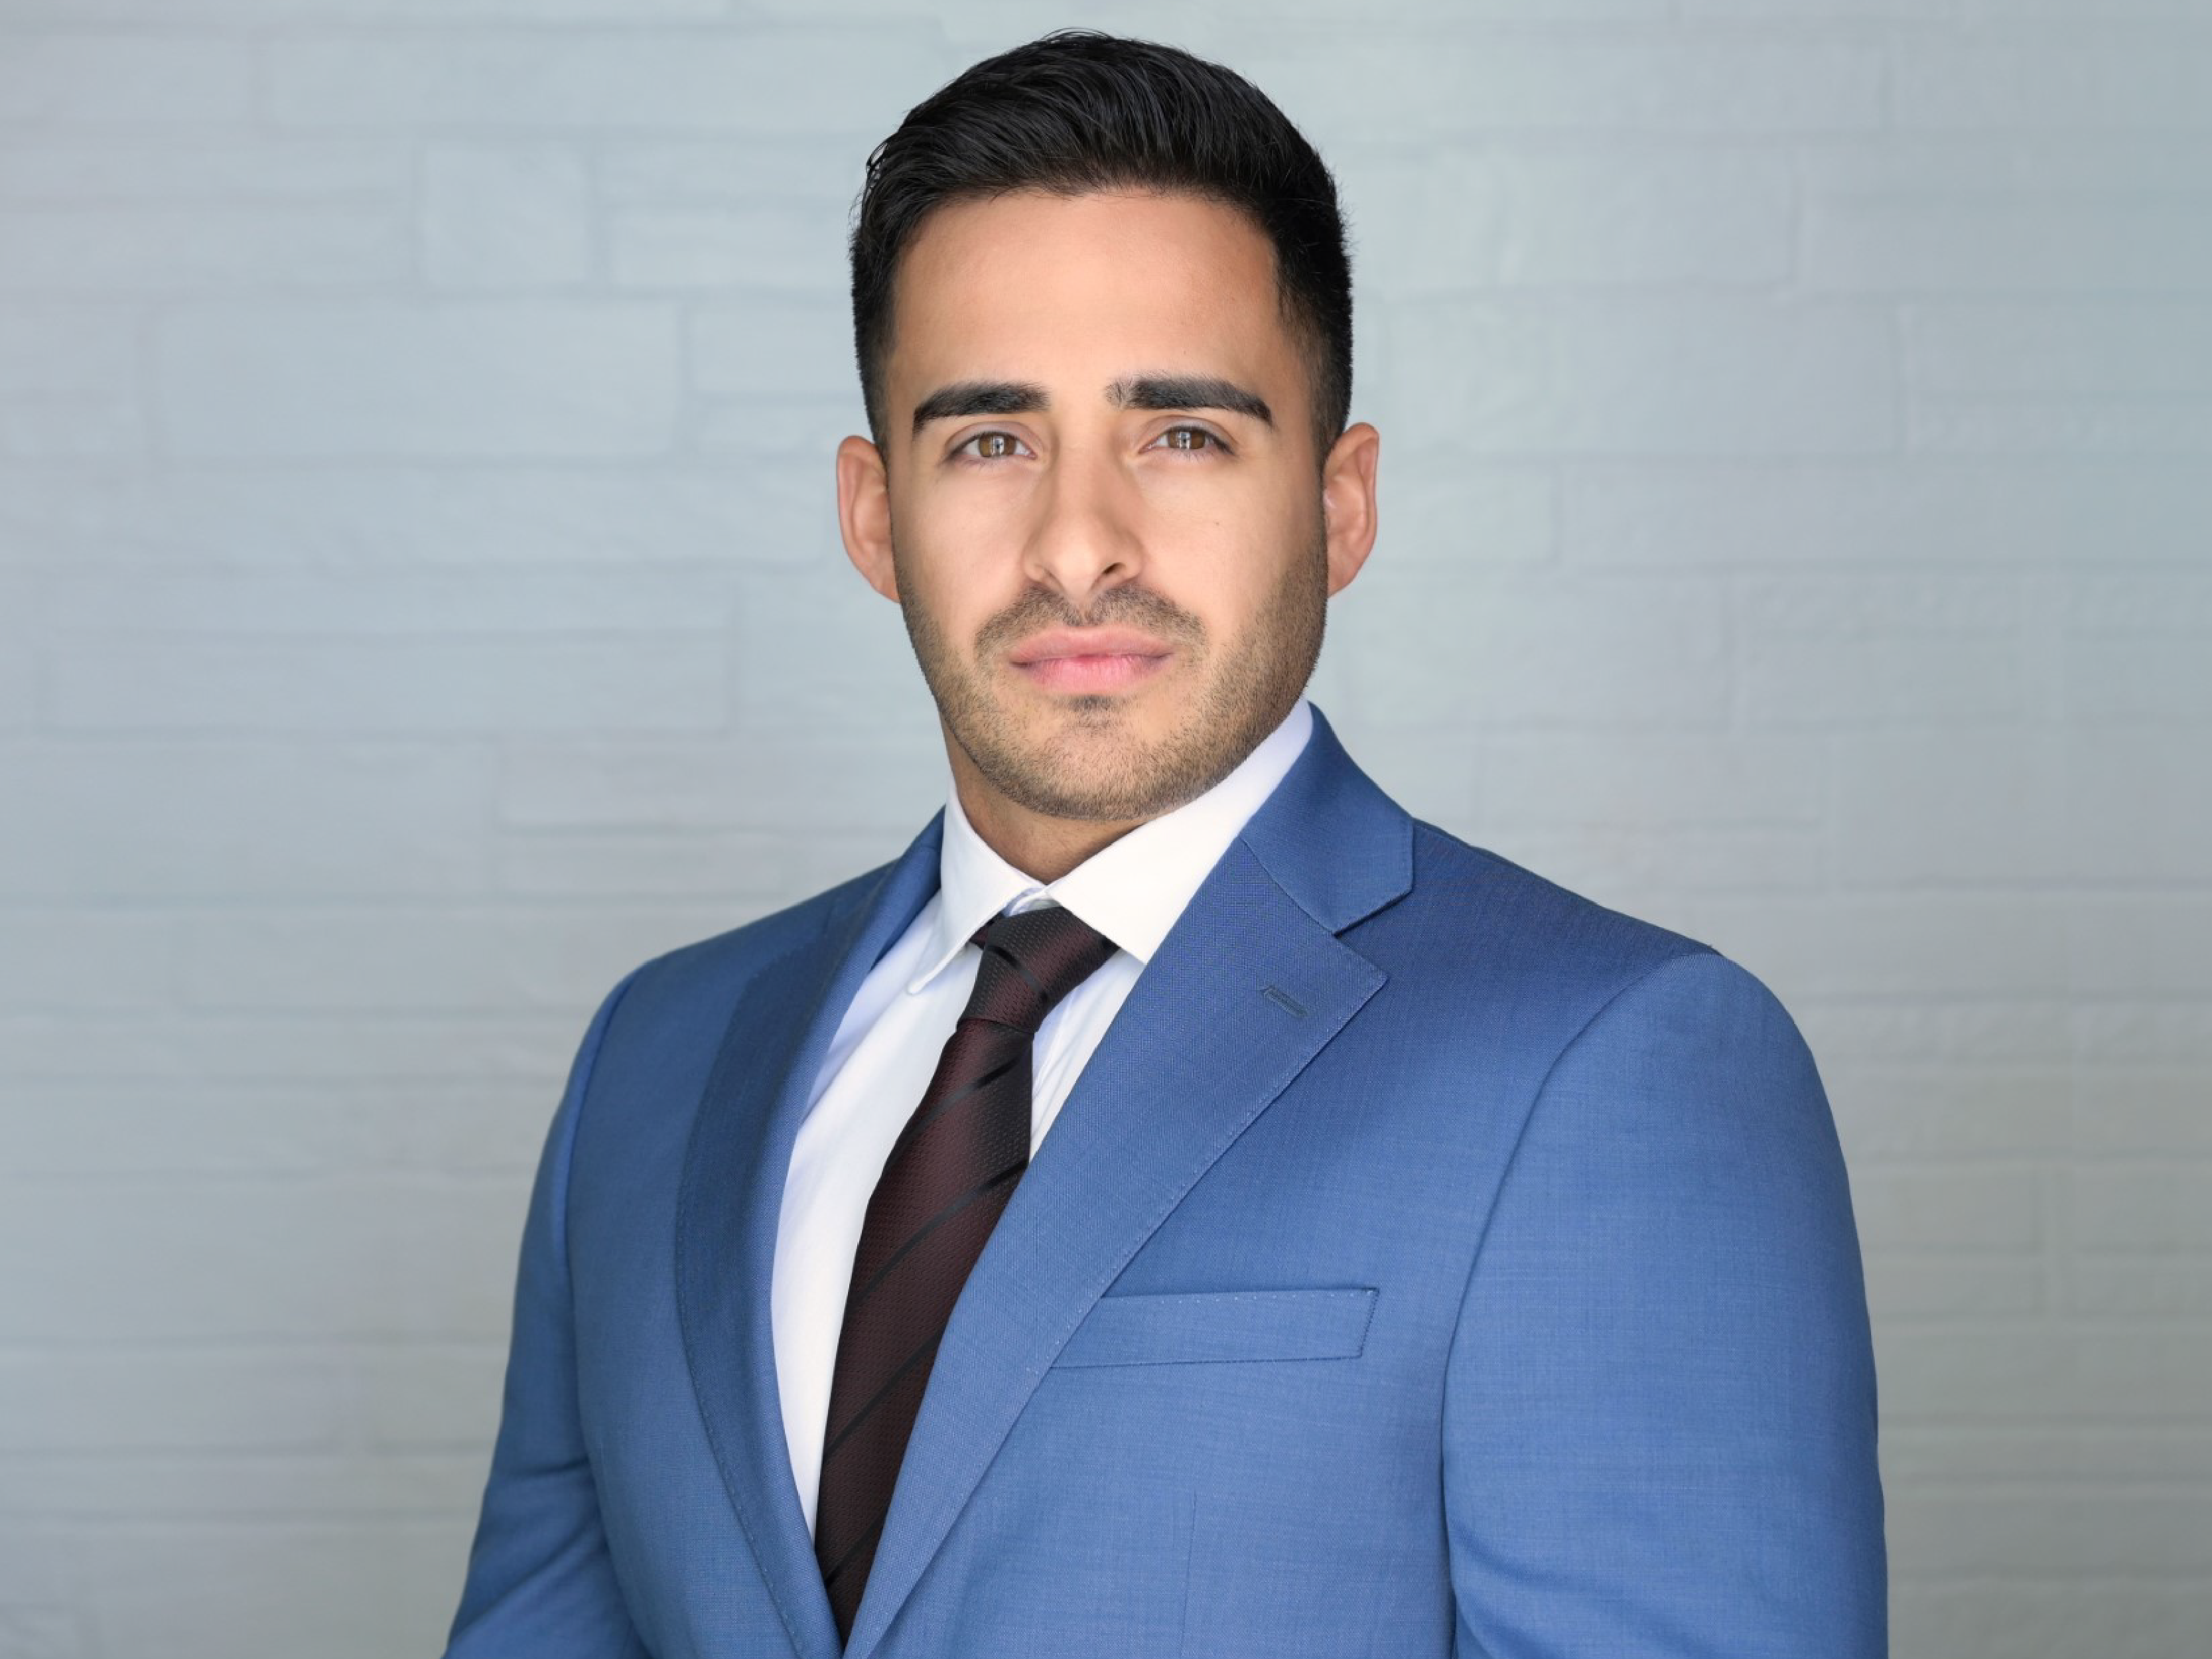 Lisandro Sky - Loan Officer At The TRES Group